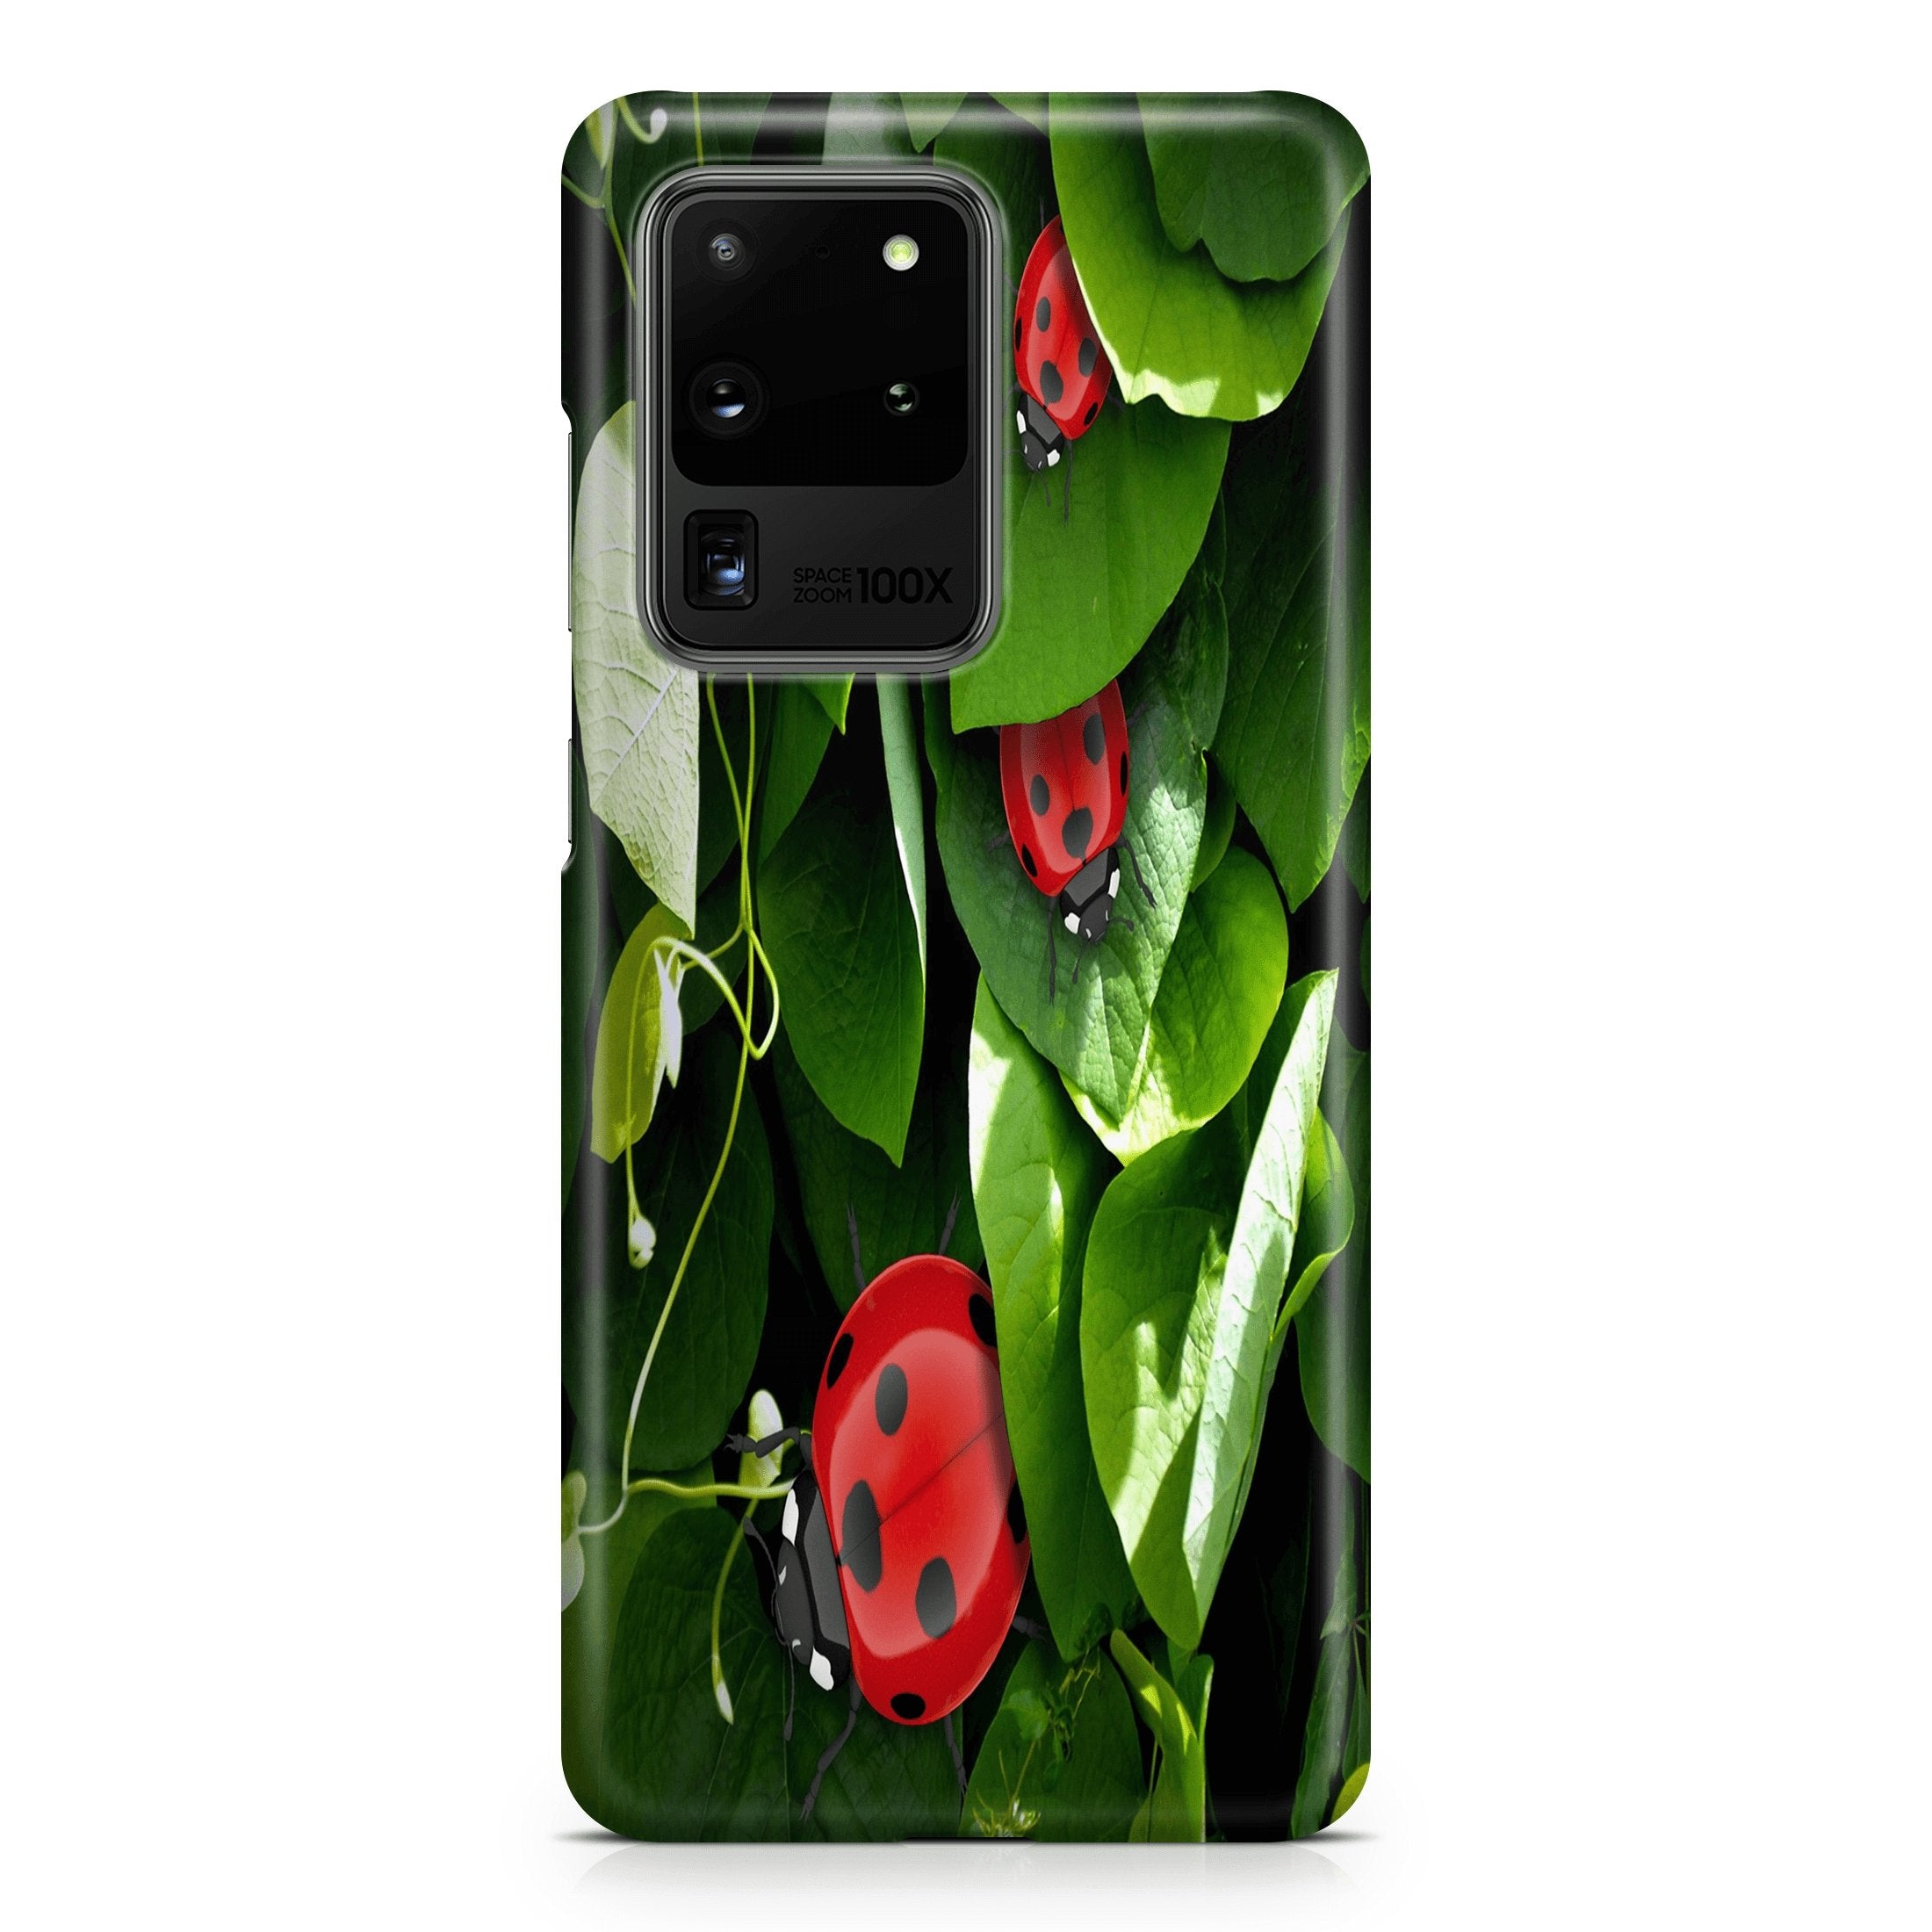 Lucky Ladybug - Samsung phone case designs by CaseSwagger